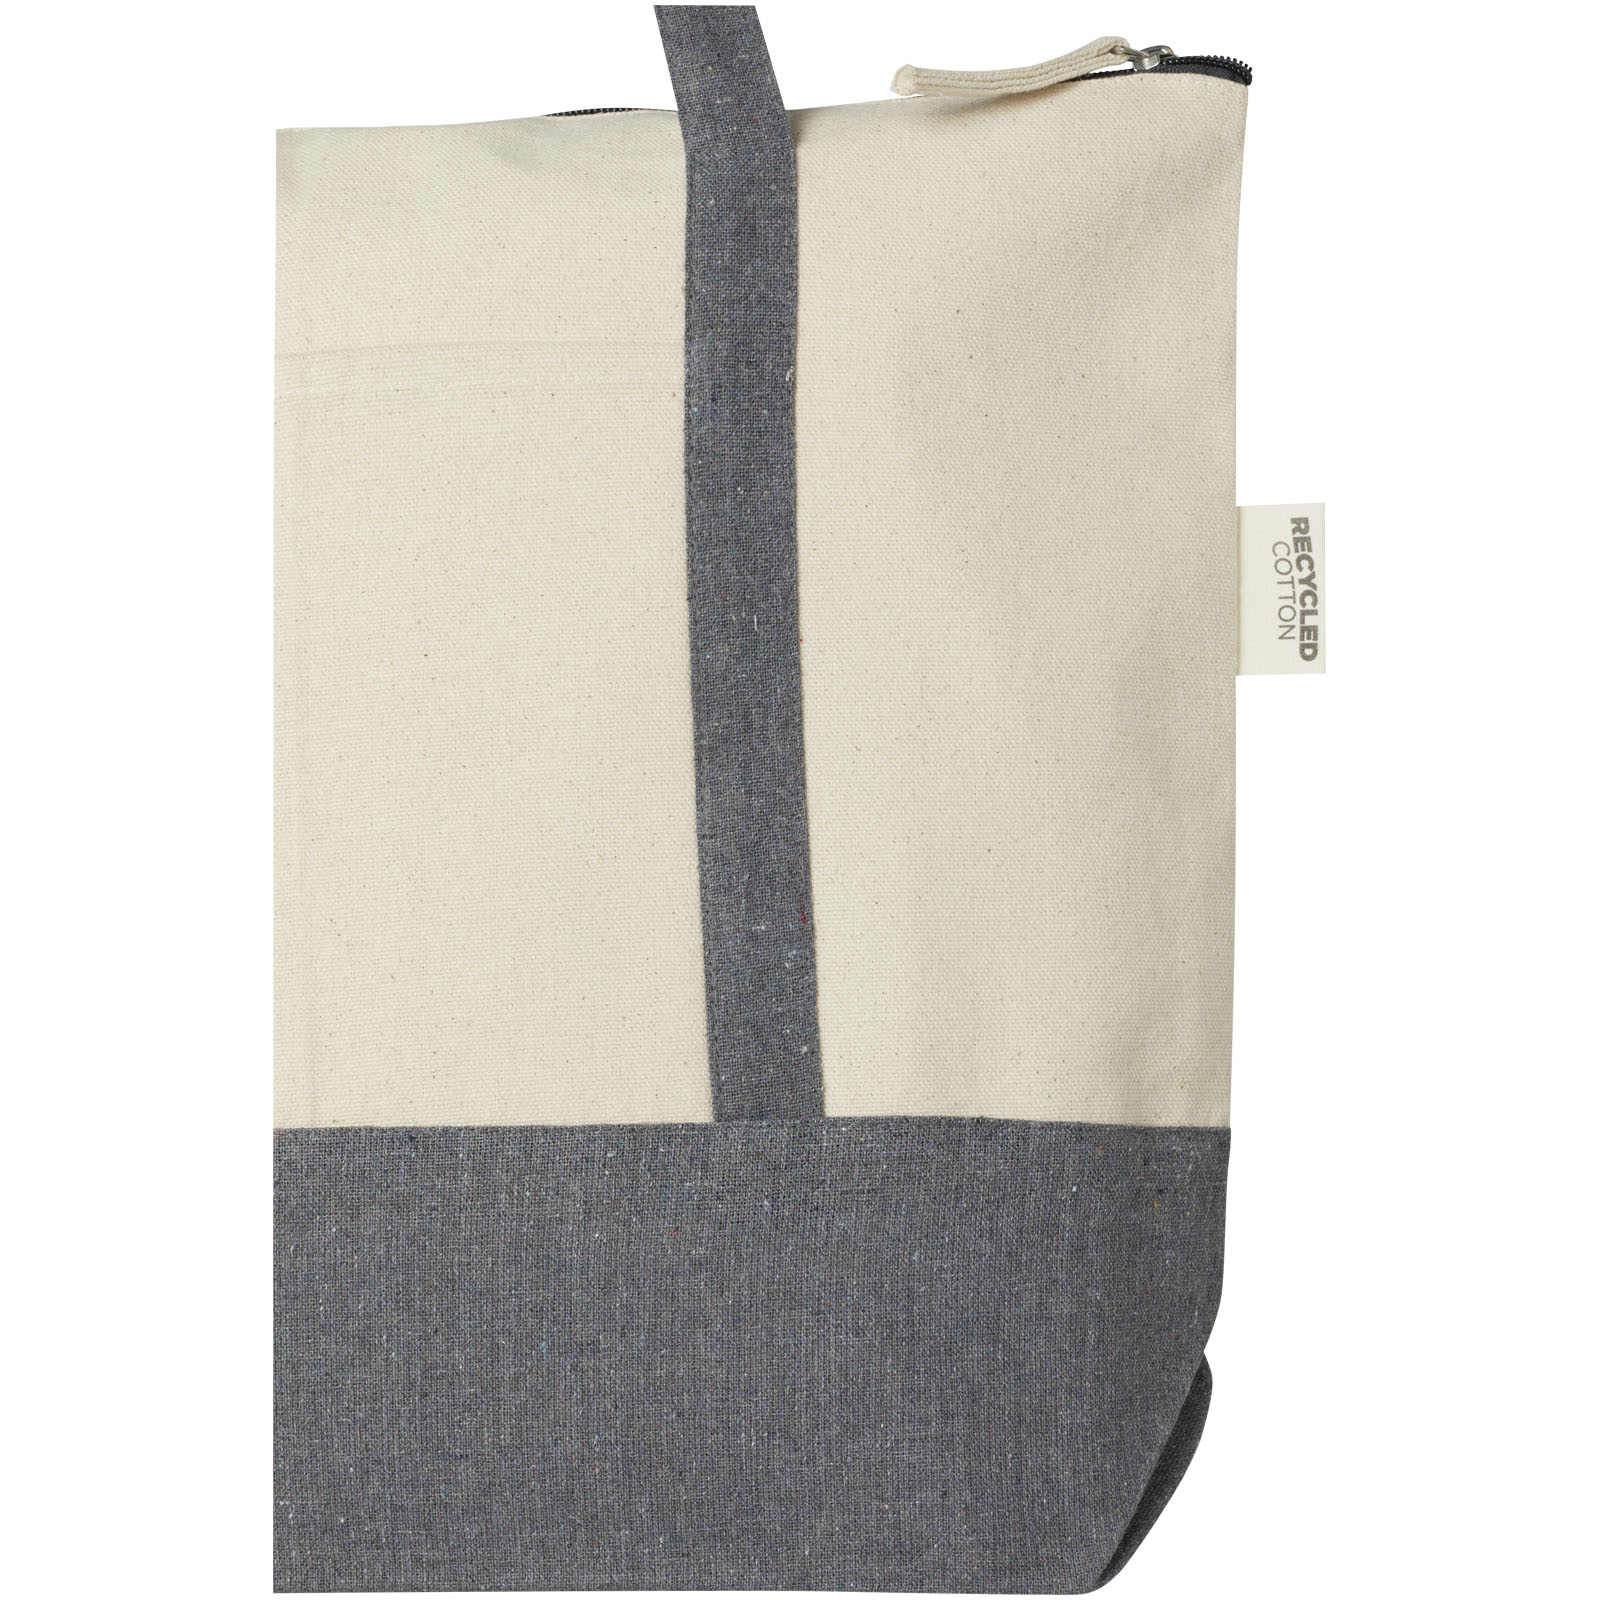 Advertising Shopping & Tote Bags - Repose 320 g/m² recycled cotton zippered tote bag 10L - 5